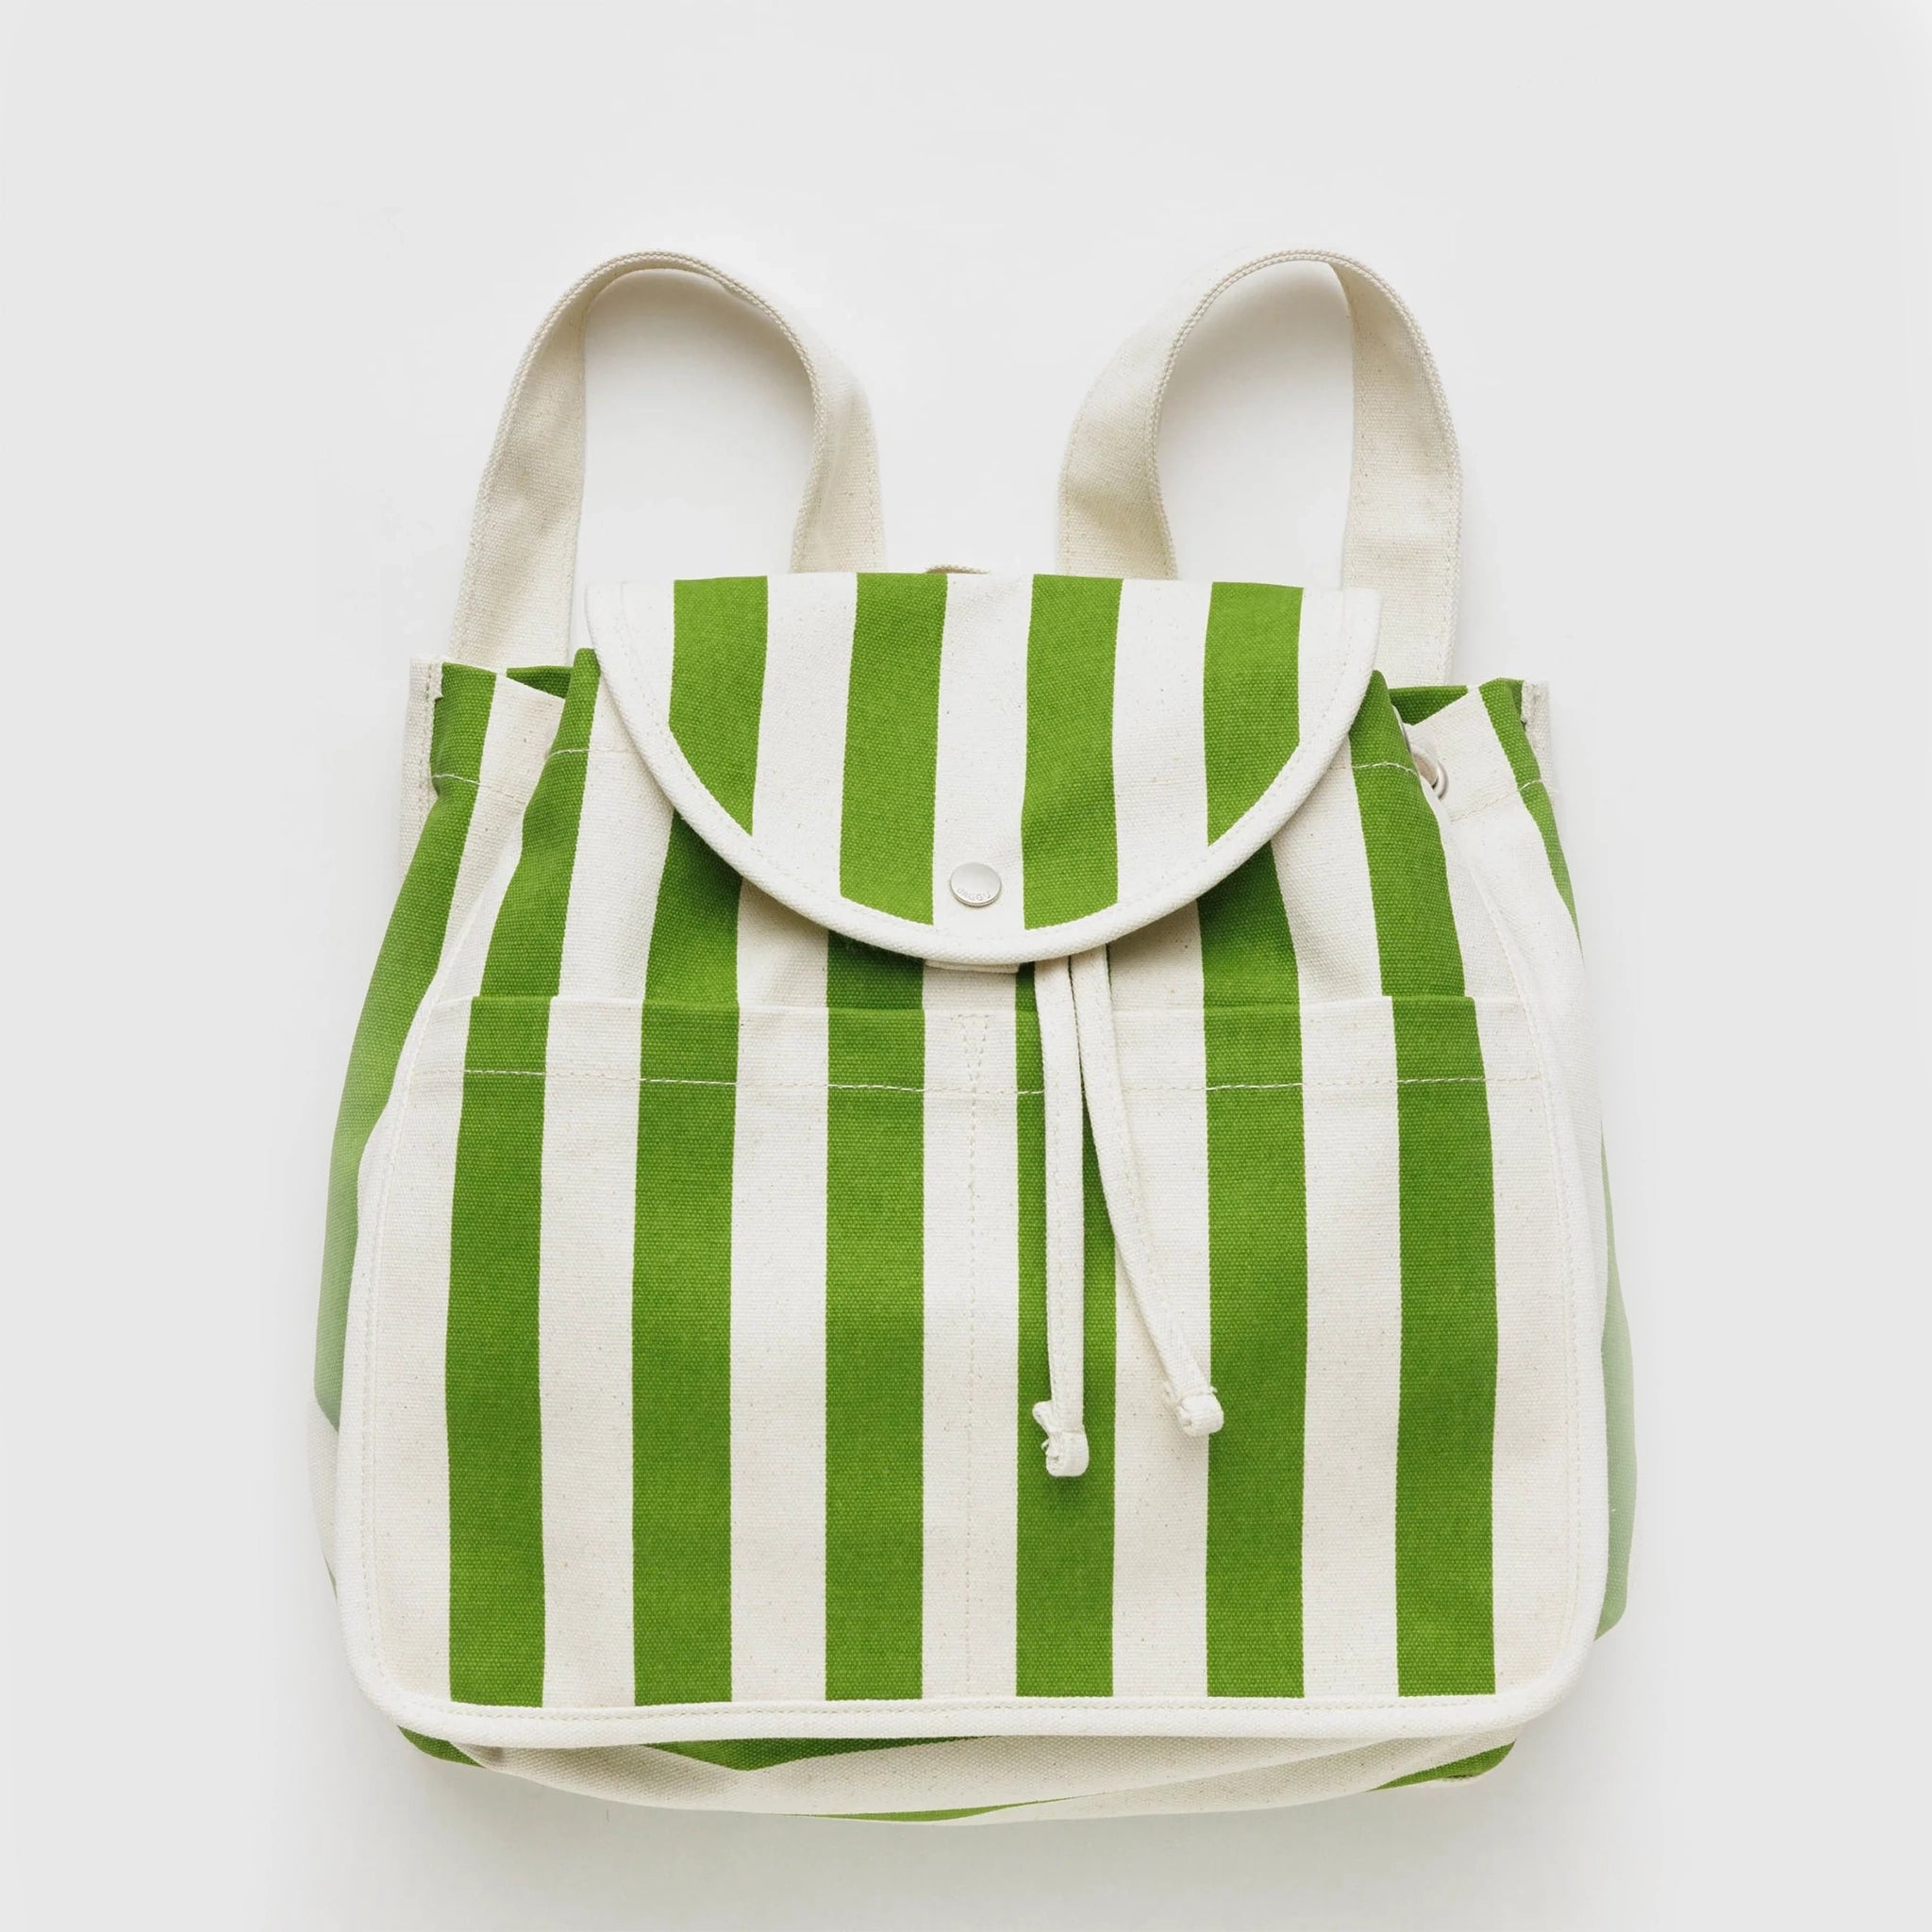 On a cream background is a green and white striped backpack with a folded flap and a drawstring opening along with two exterior pockets on the outside.